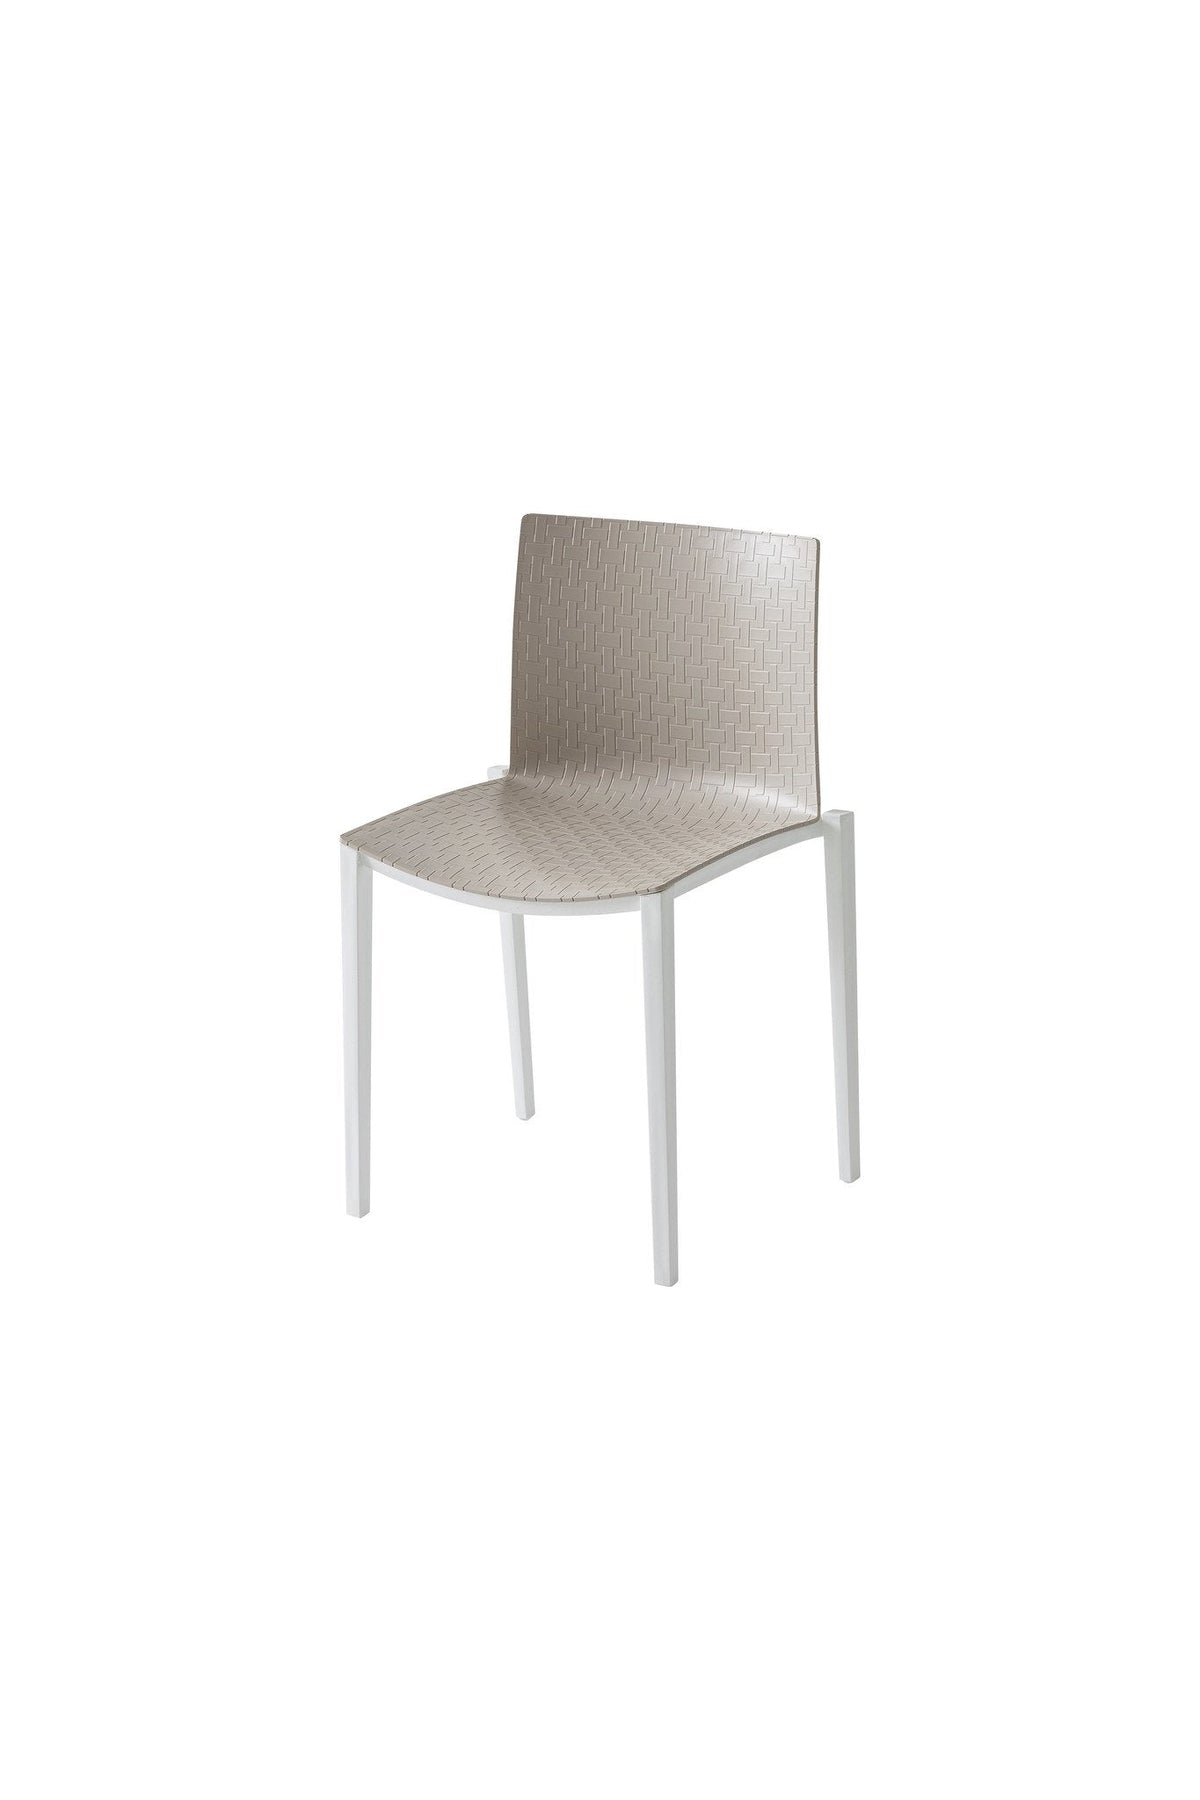 Clipperton Side Chair-Gaber-Contract Furniture Store